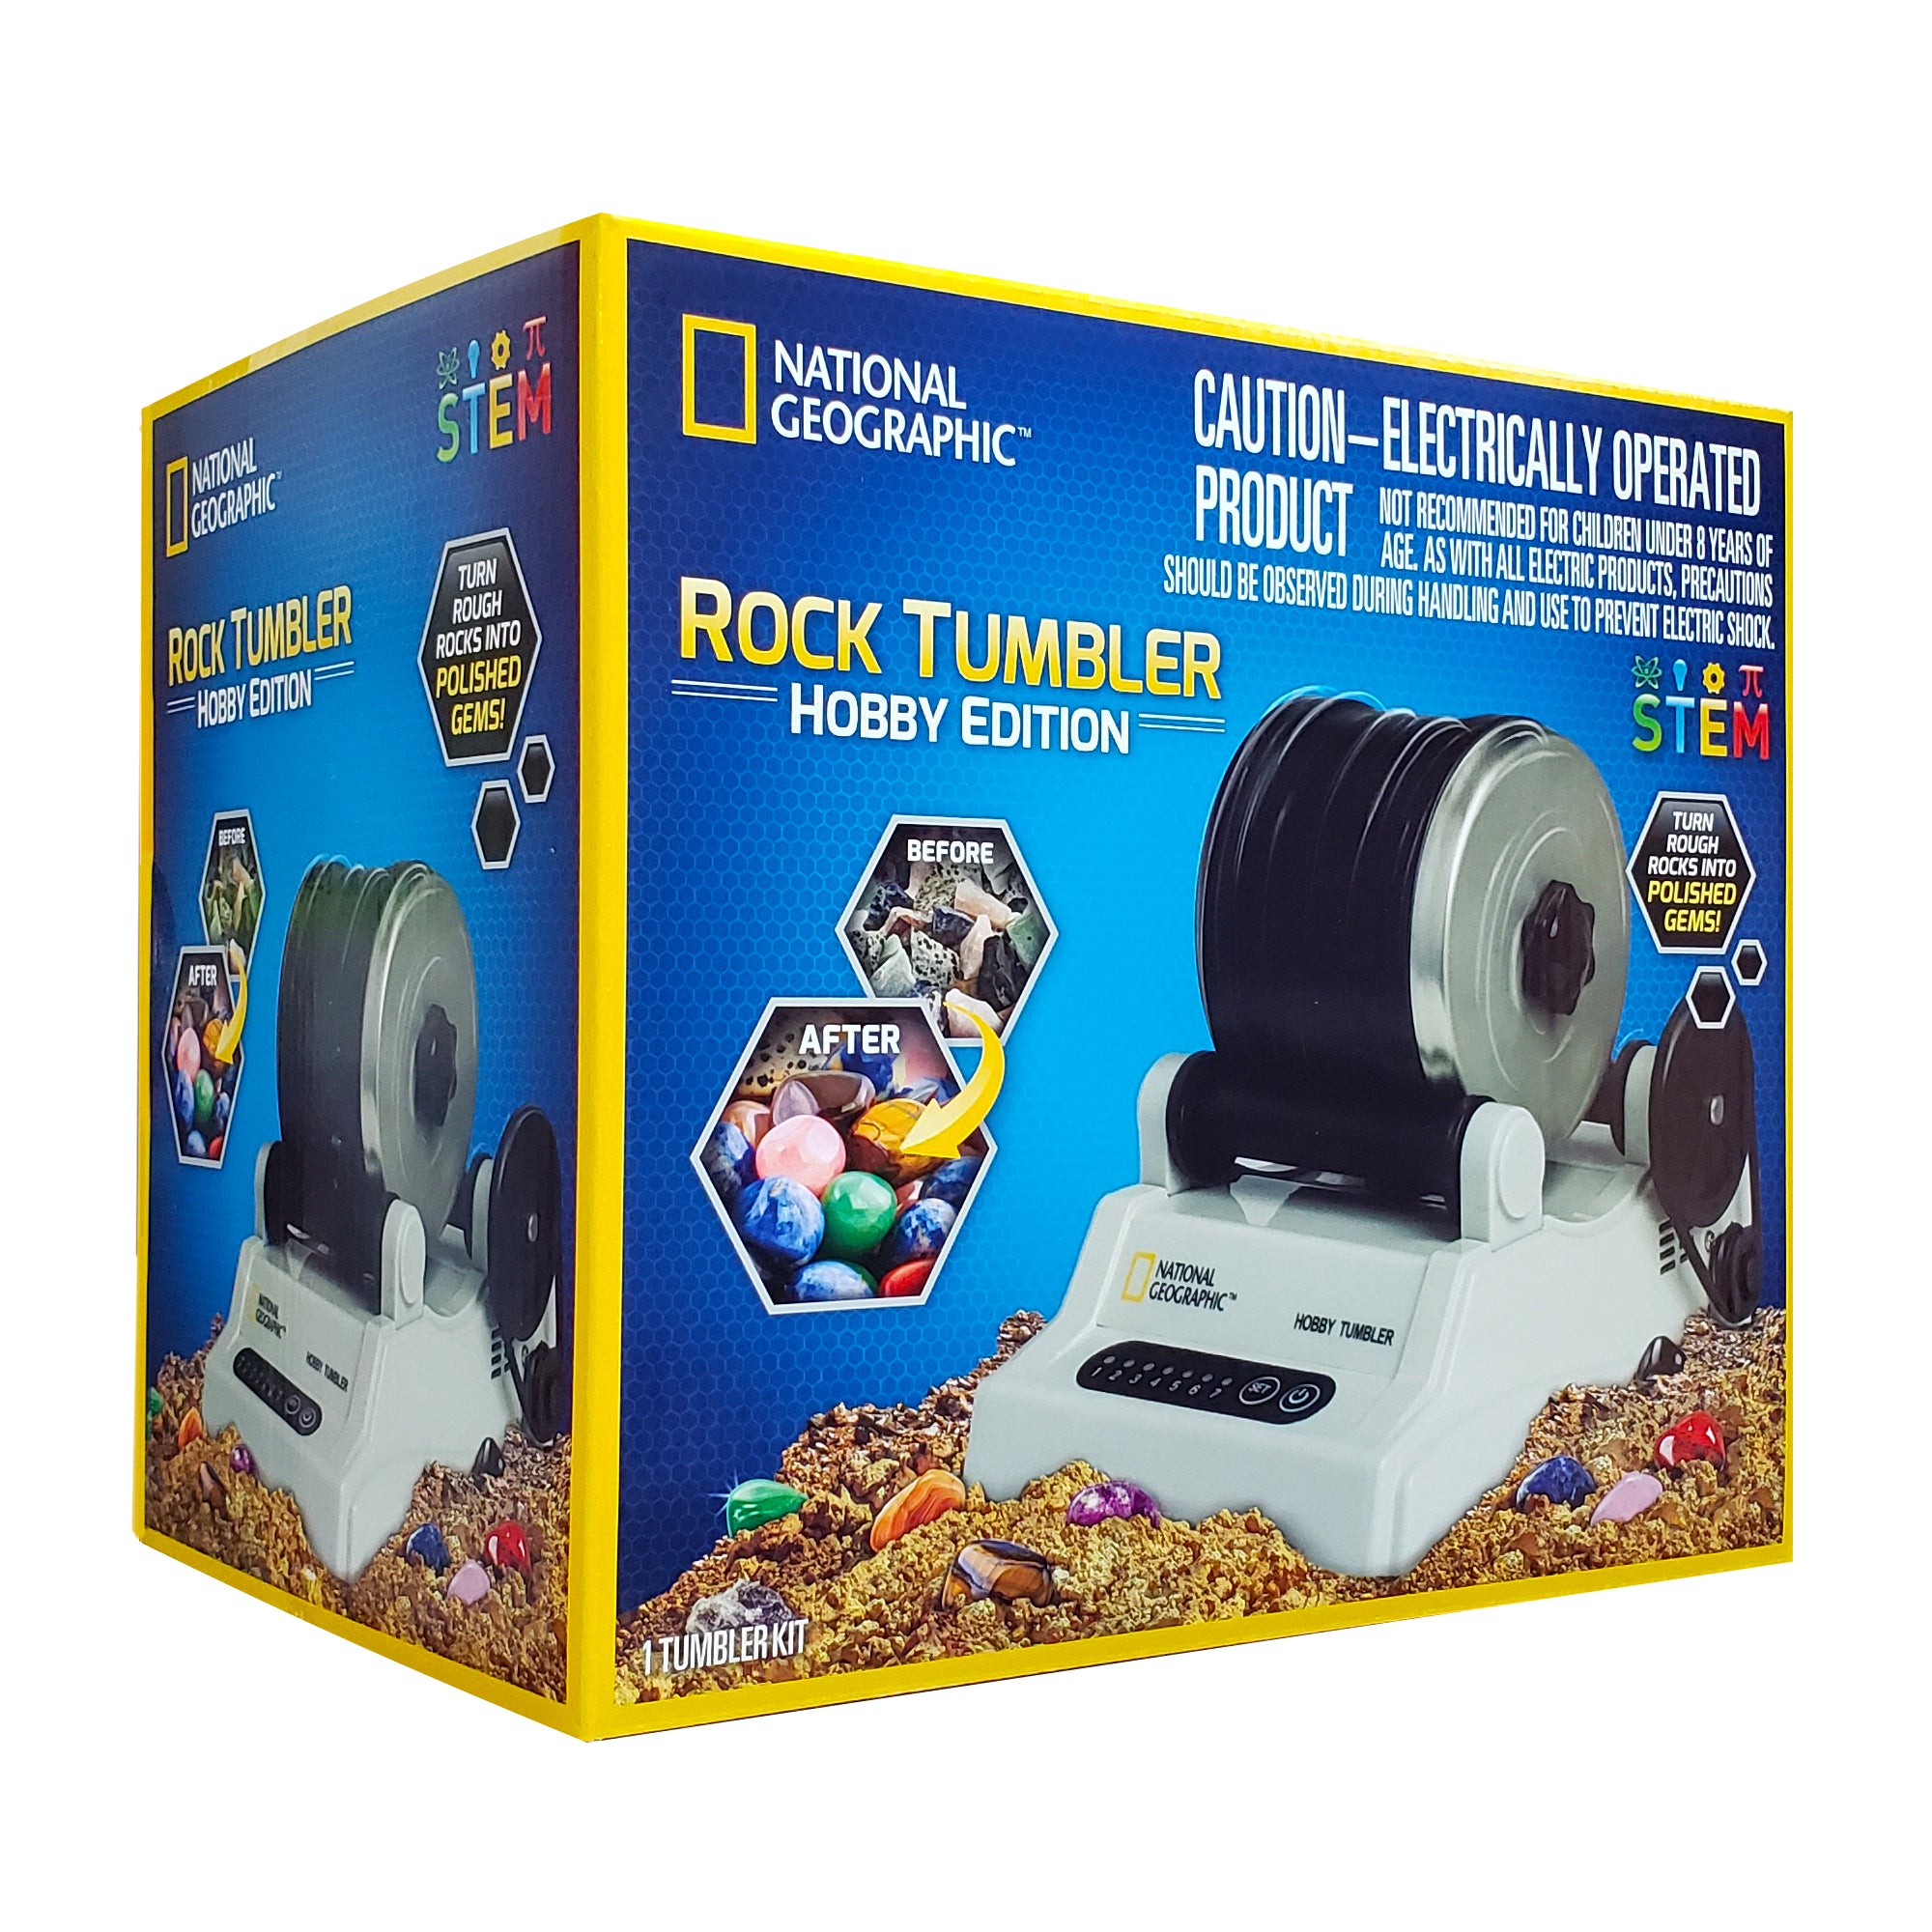 NATIONAL GEOGRAPHIC ROCK TUMBLER HOBBY EDITION